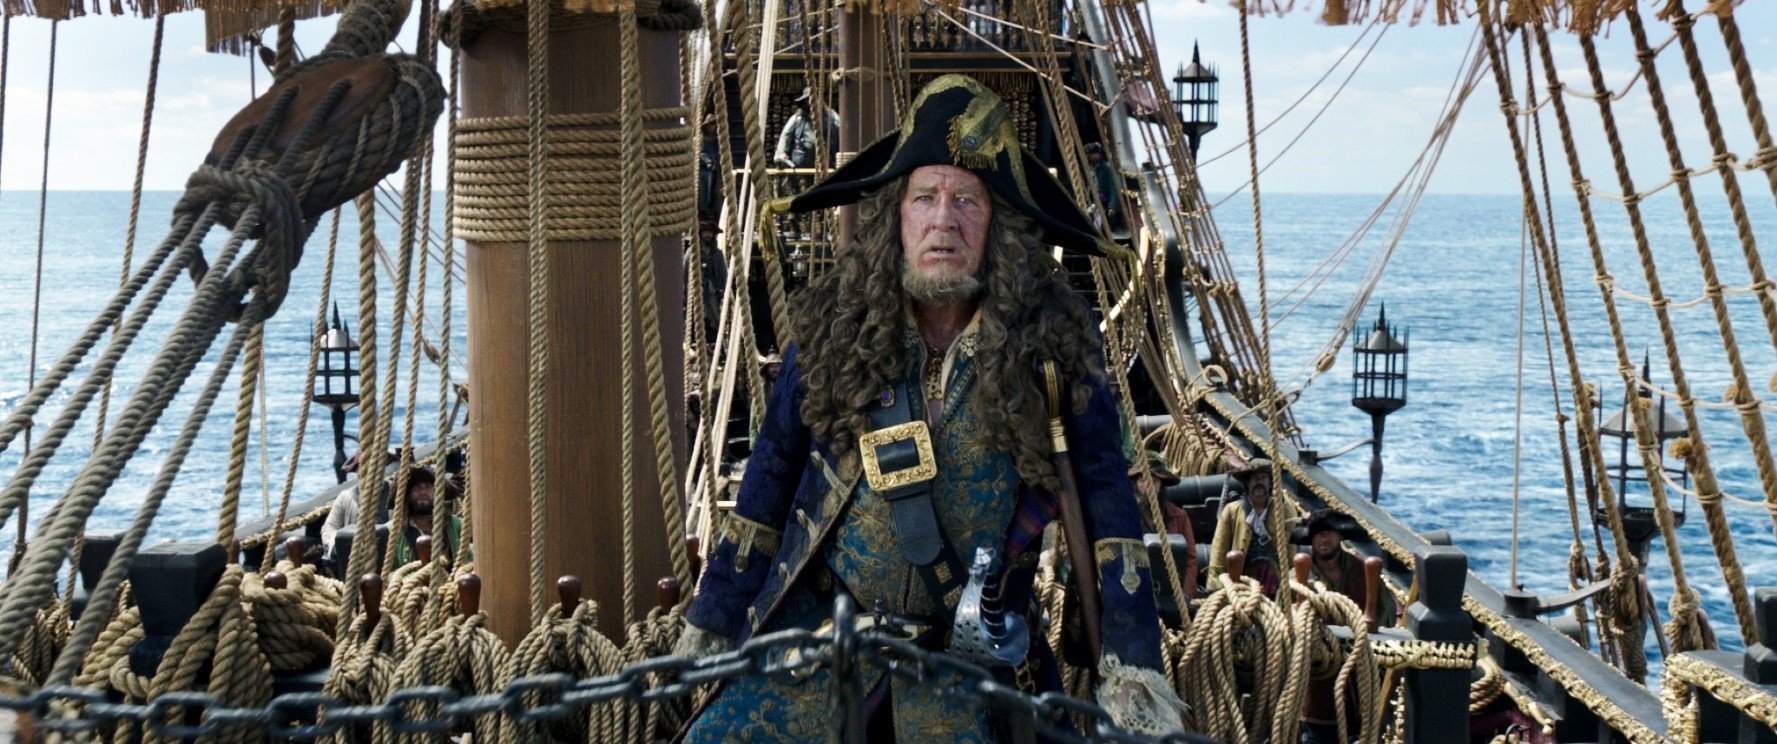 Geoffrey Rush stars as Barbossa in Walt Disney Pictures' Pirates of the Caribbean: Dead Men Tell No Tales (2017)